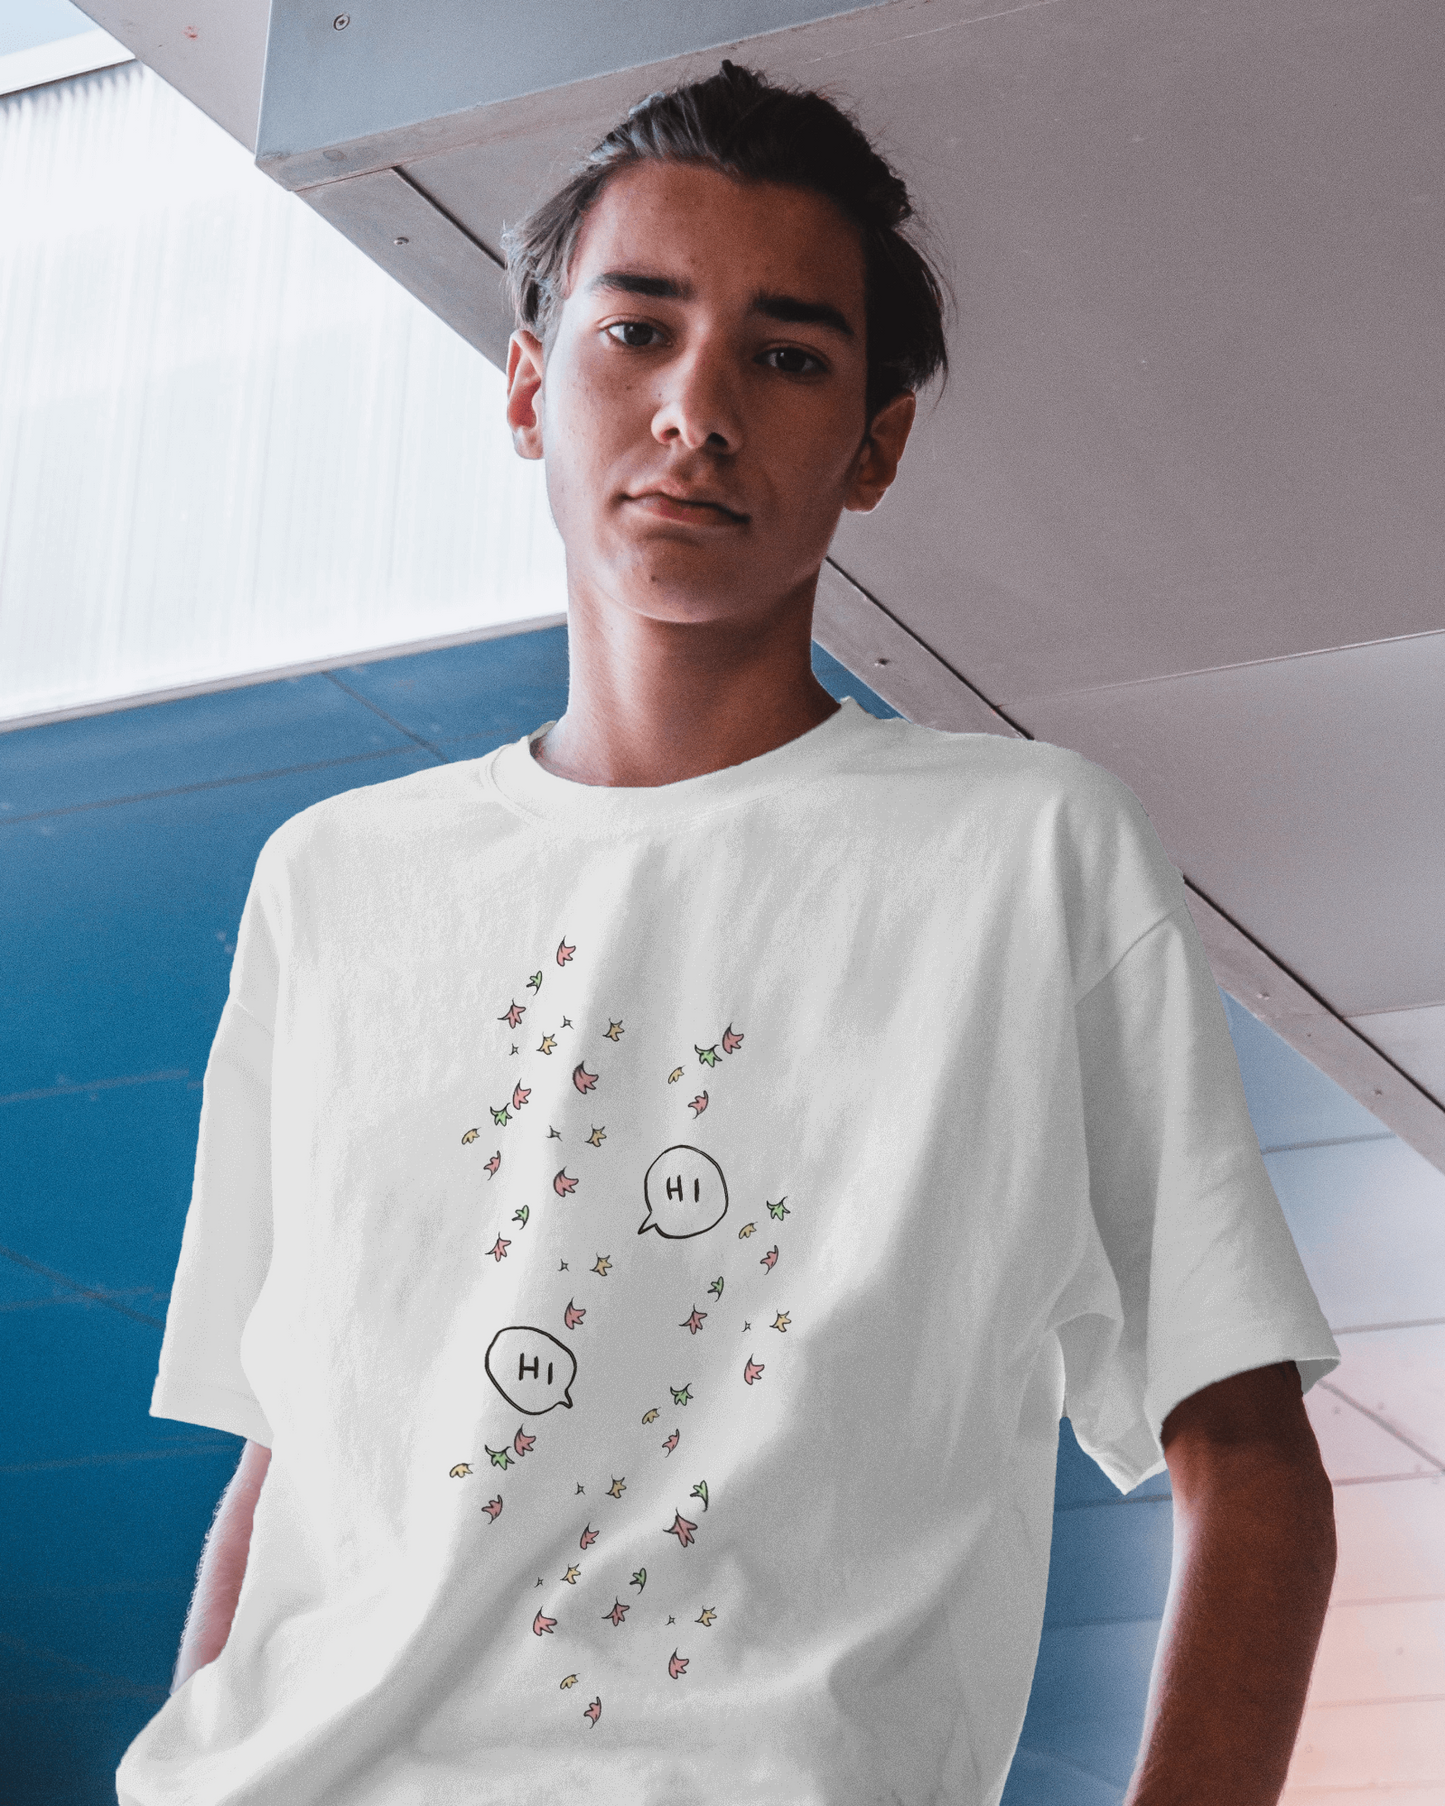 Love and Homage: 'Hi Leaves' Heartstopper Inspired Unisex Crewneck Tee Clothes By Tobey Alexander